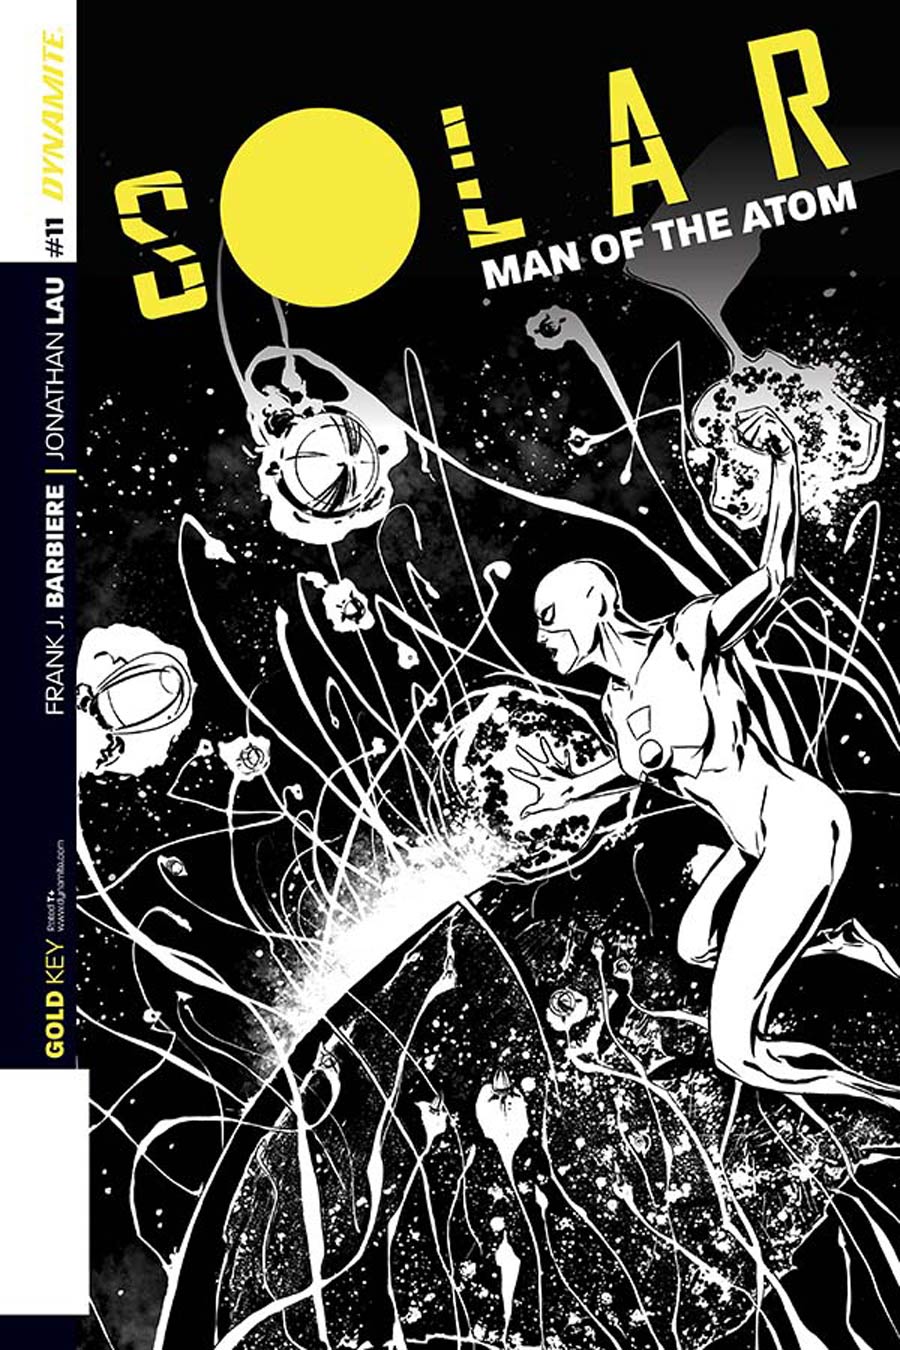 Solar Man Of The Atom Vol 2 #11 Cover C Incentive Marc Laming Black & White Cover